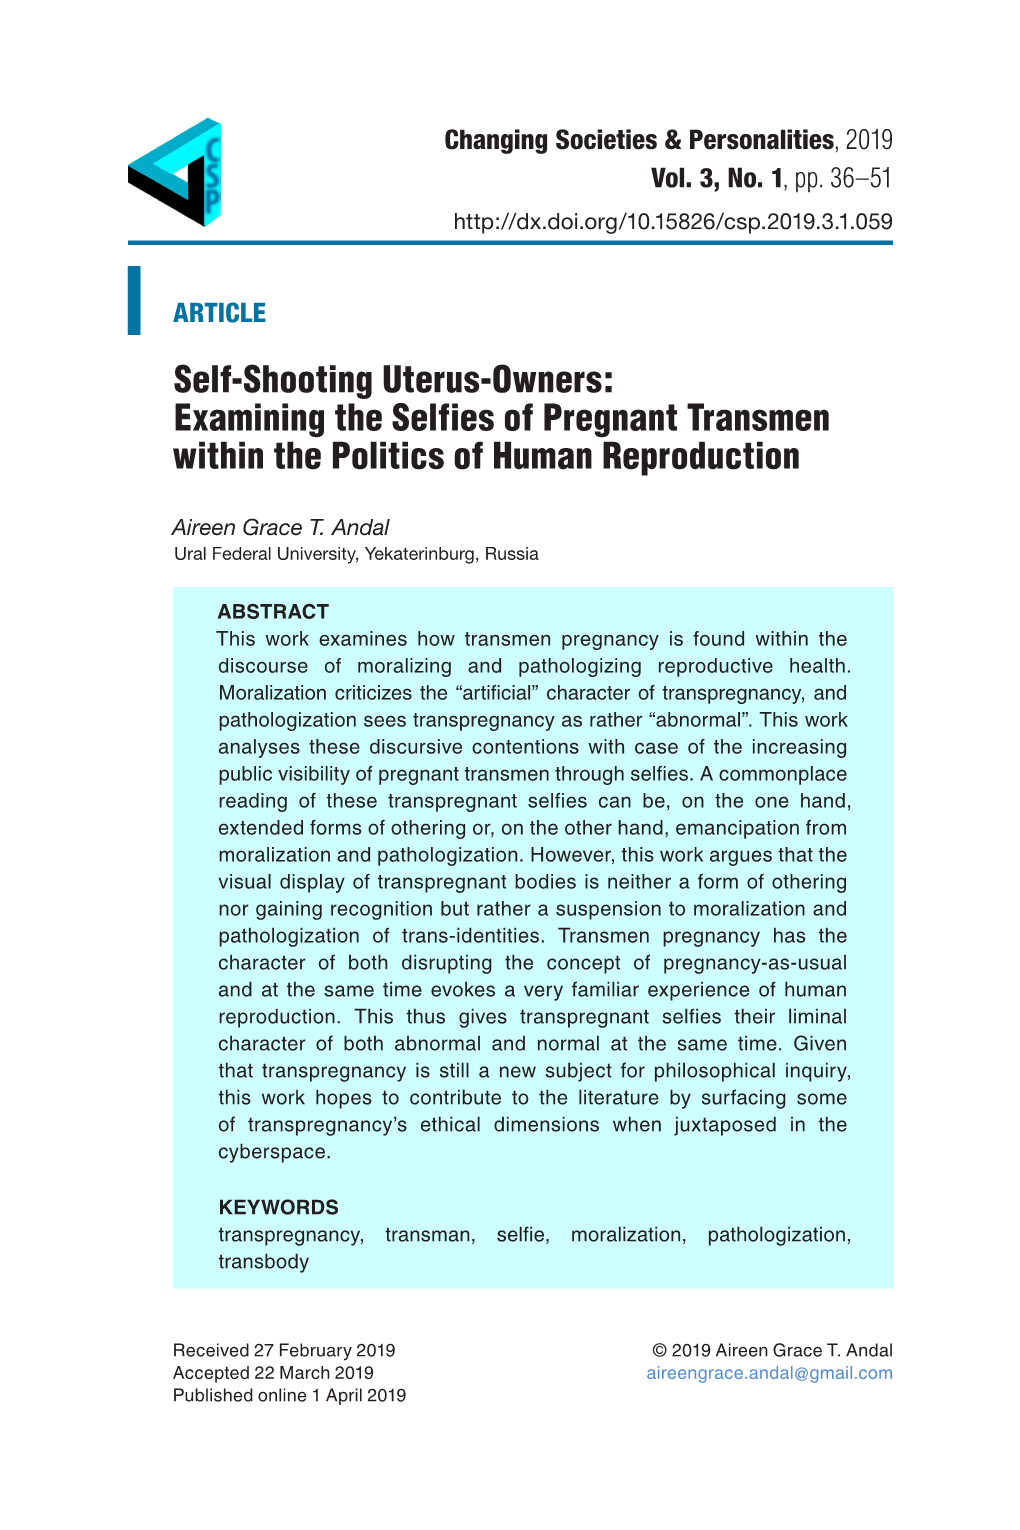 Self-Shooting Uterus-Owners: Examining the Selfies of Pregnant Transmen Within the Politics of Human Reproduction